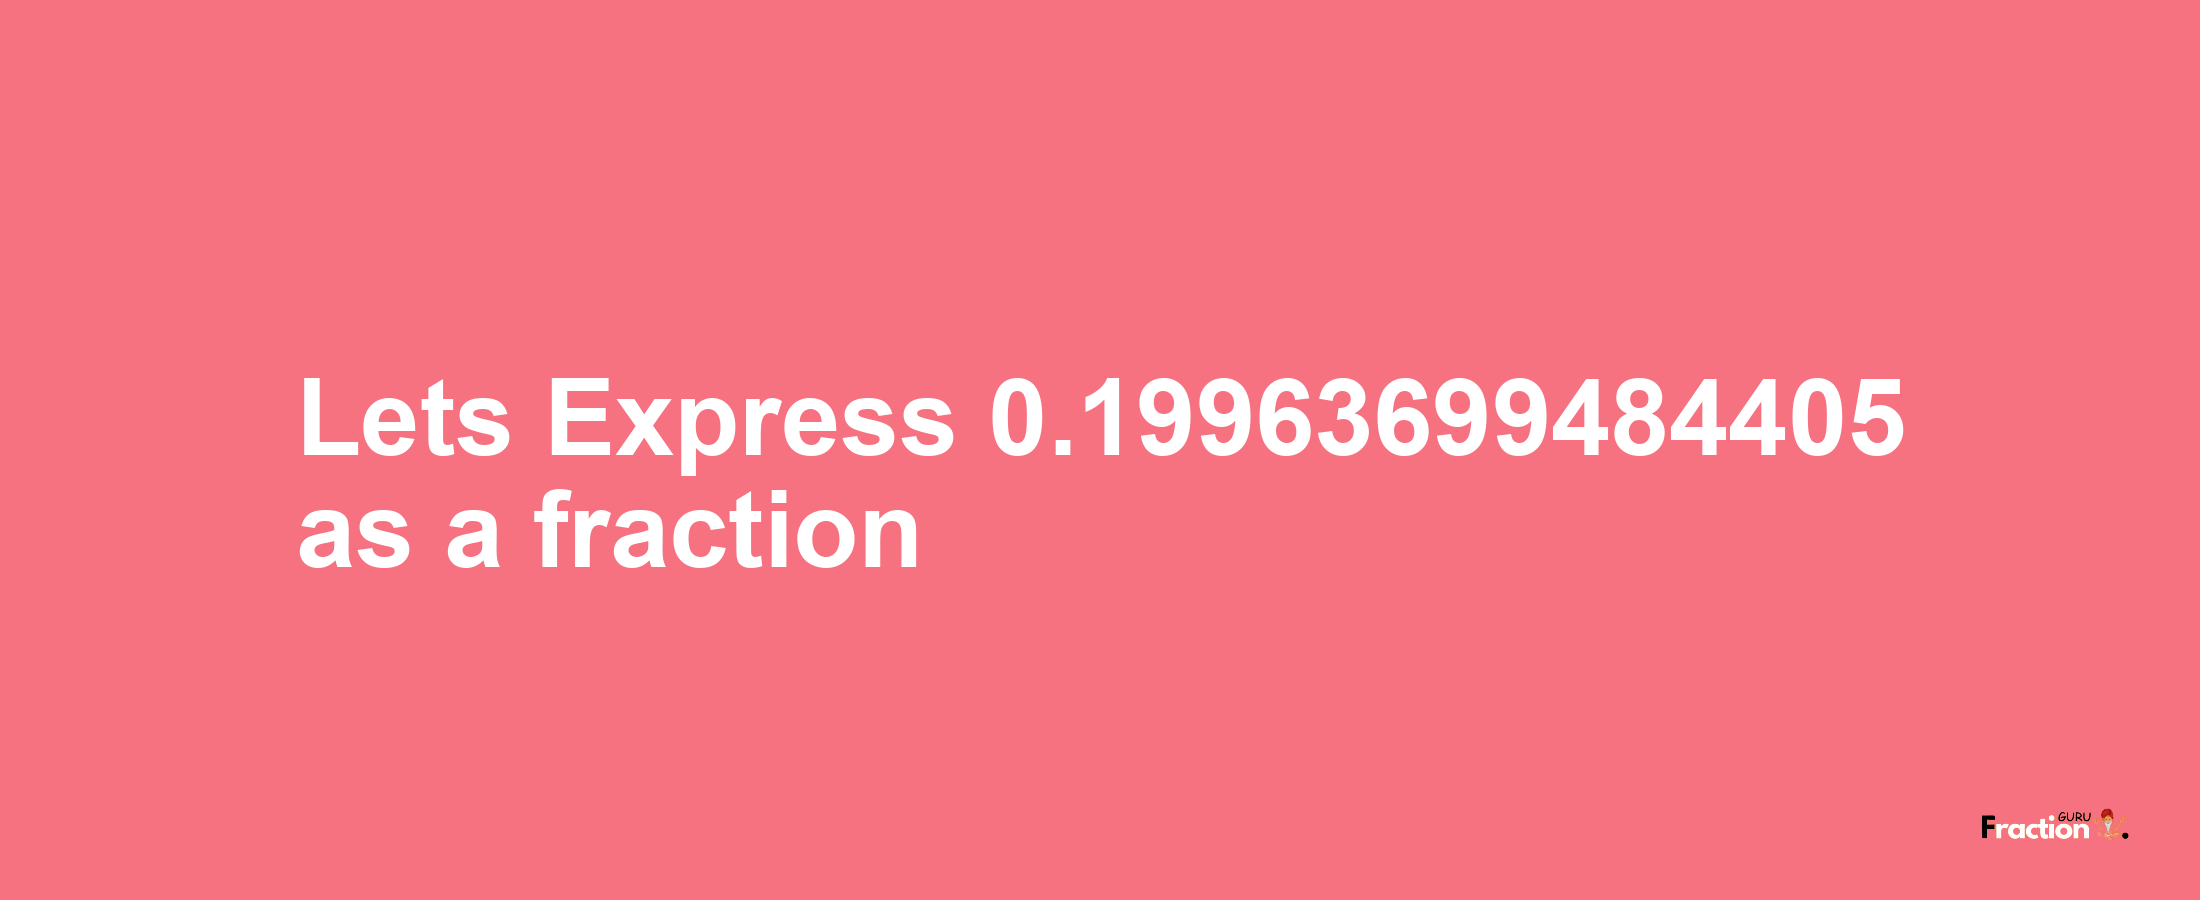 Lets Express 0.19963699484405 as afraction